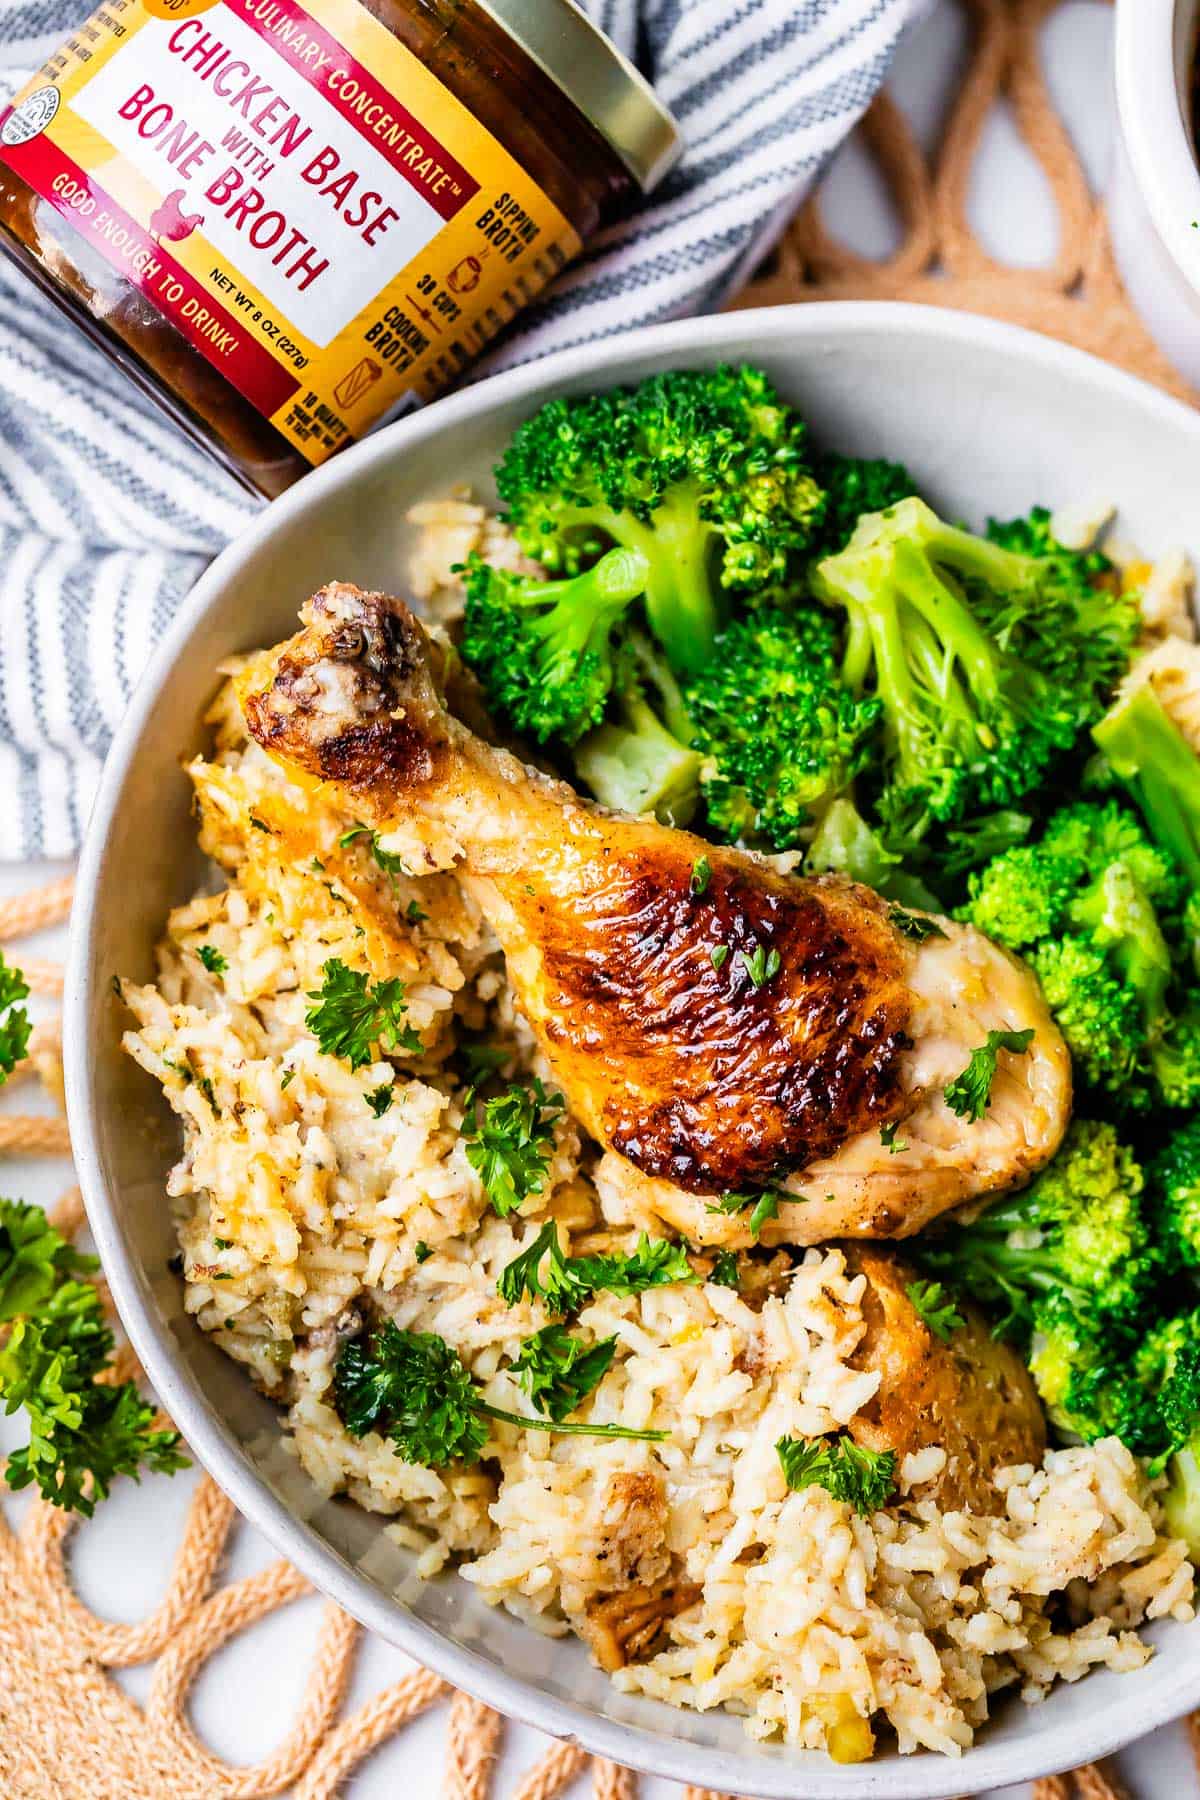 browned chicken drumstick with rice from the casserole and broccoli in a ceramic bowl.